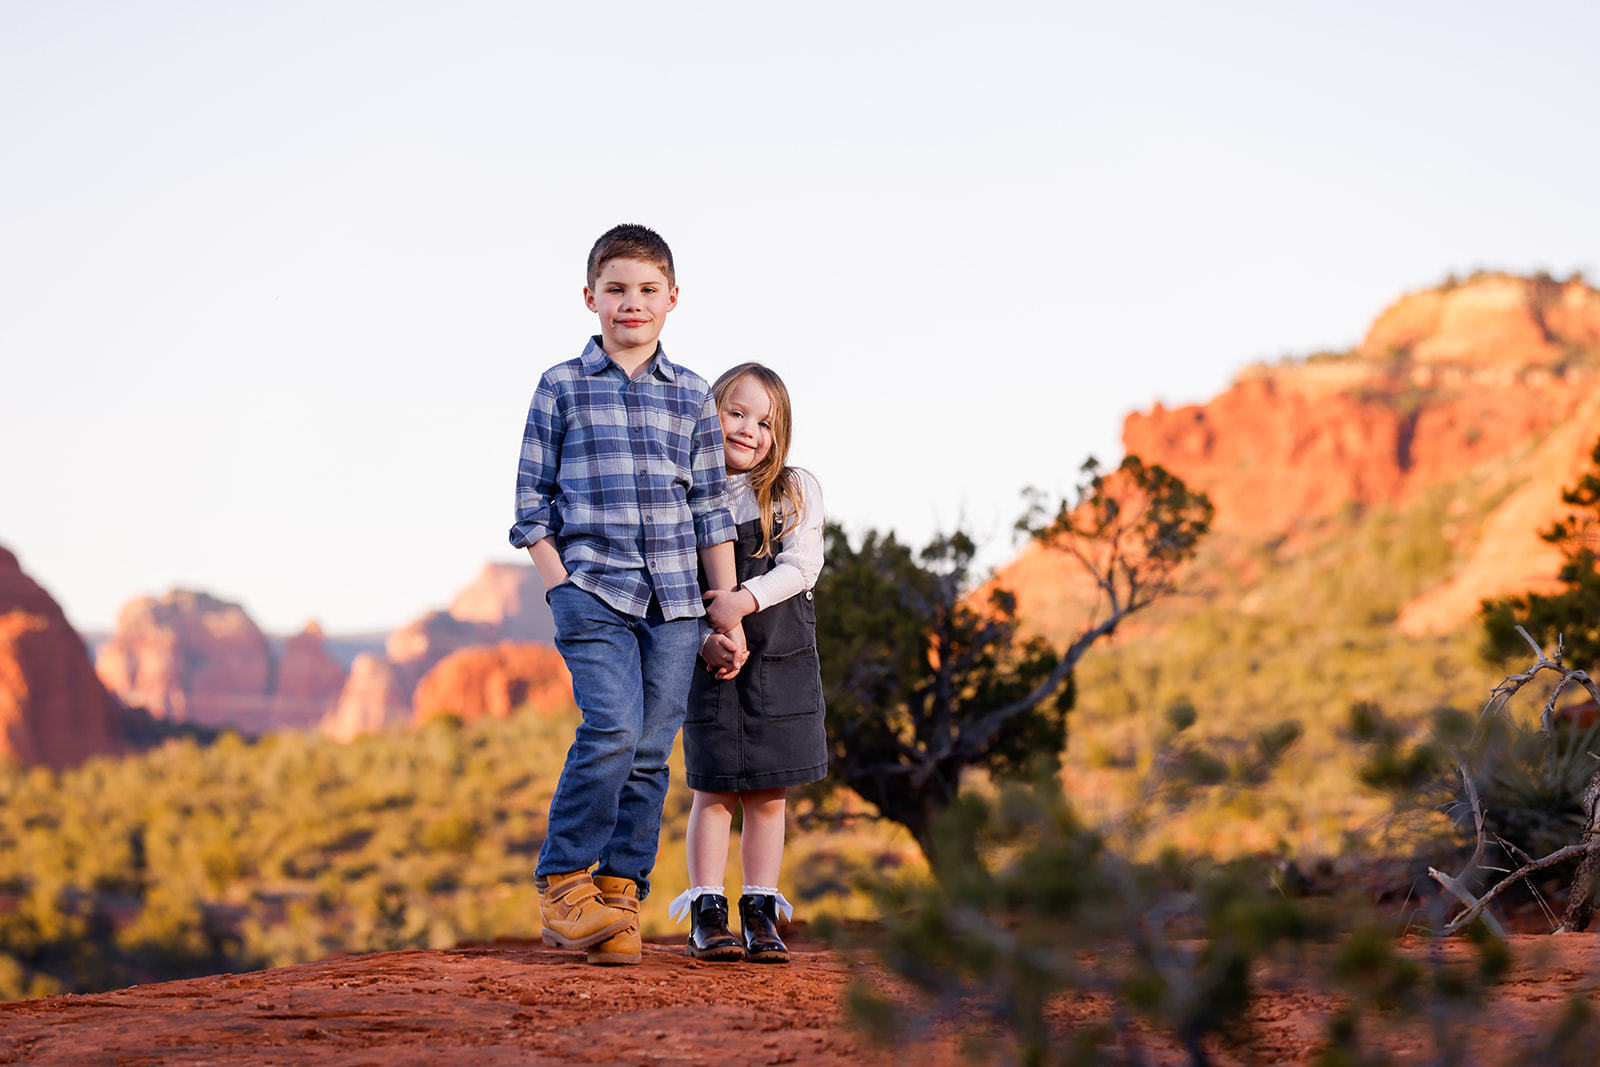 Sedona family kid portrait photographer, classic, fun, natural outdoor photo session in the red rocks of Arizona